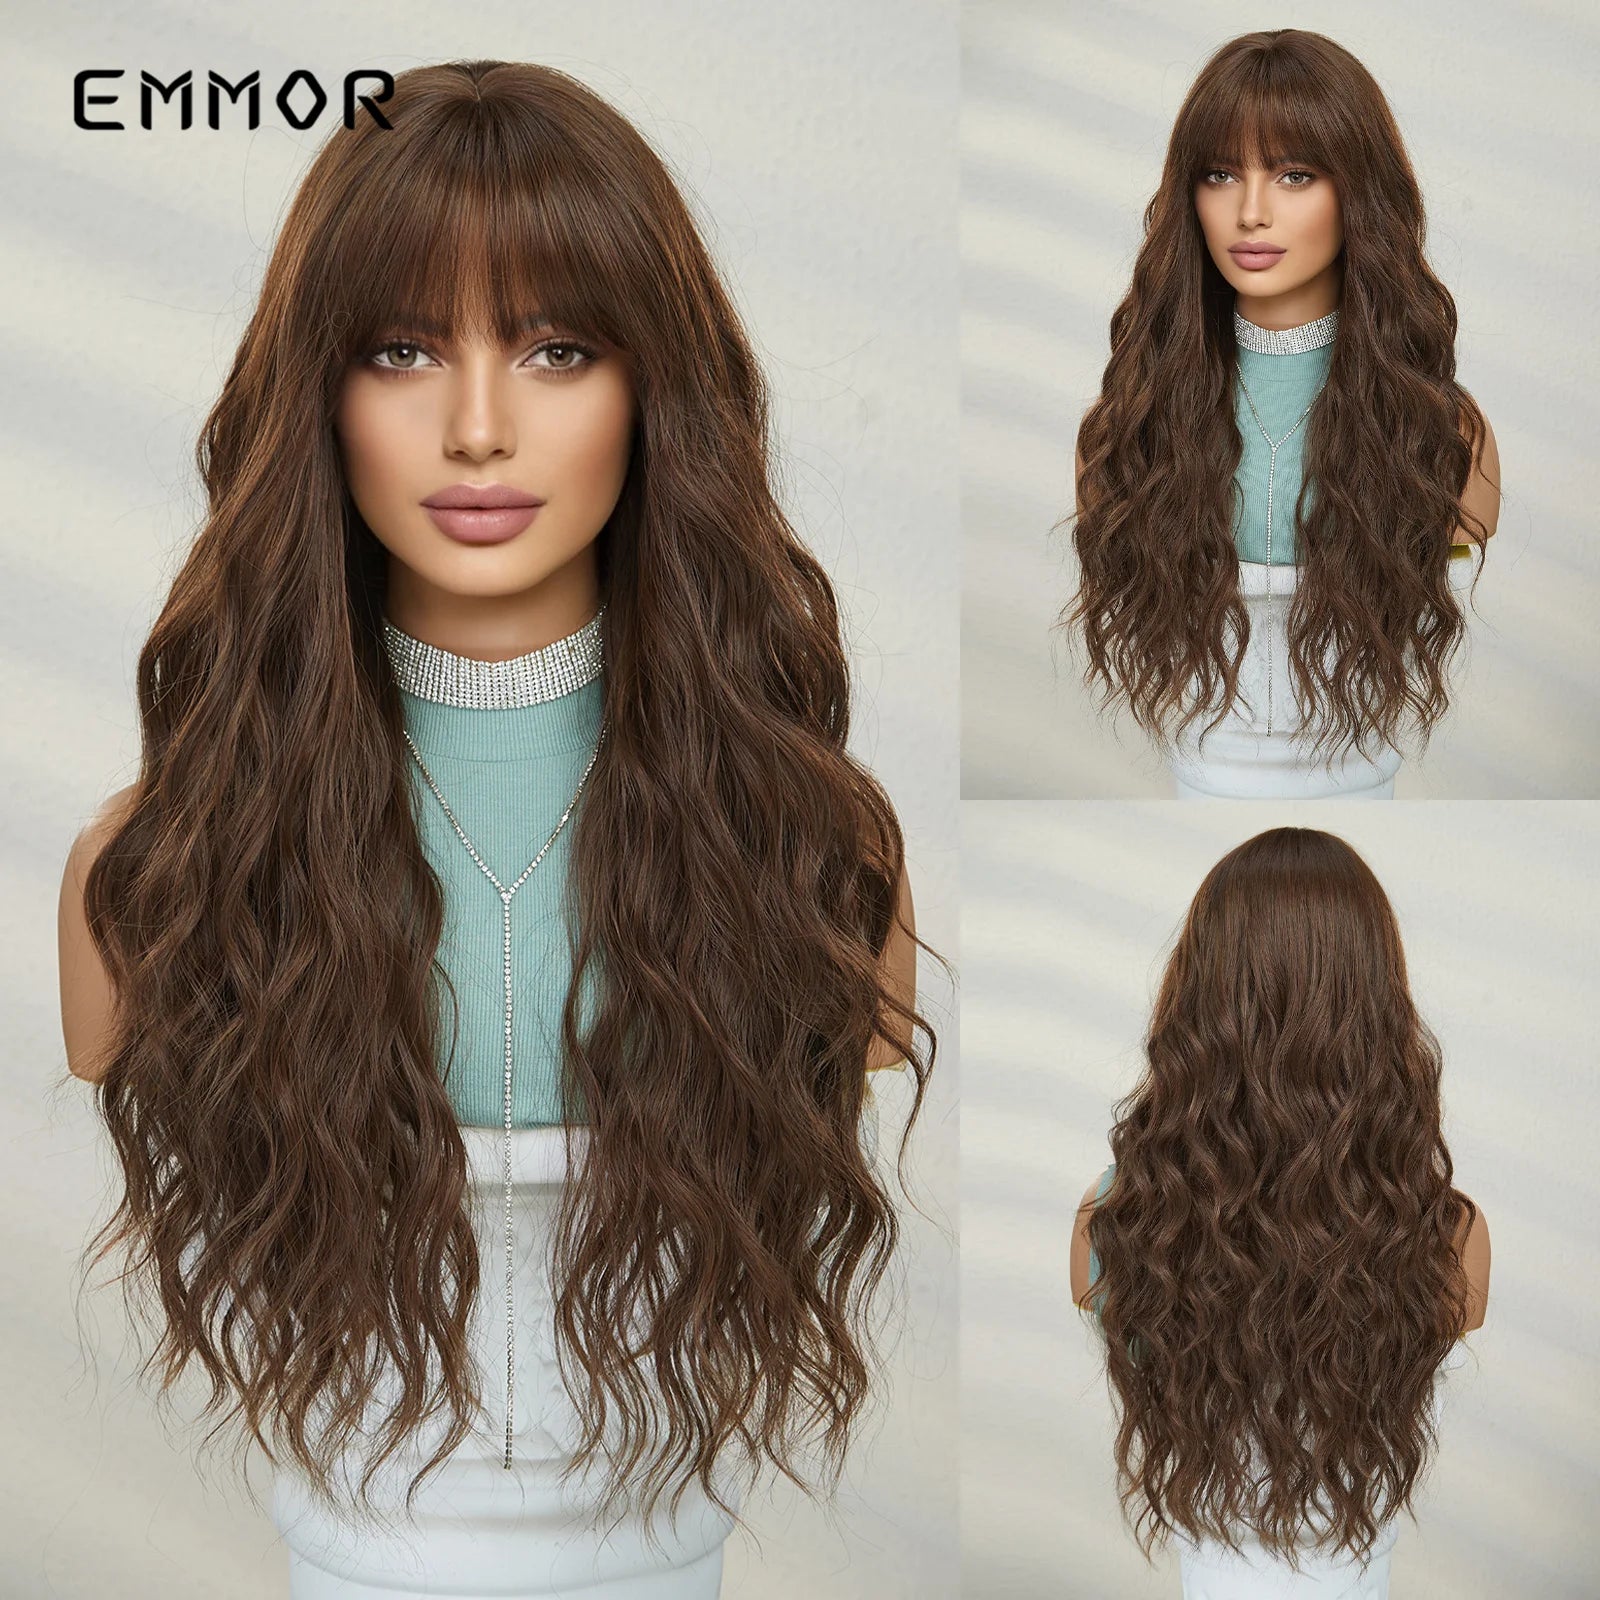 Emmor Synthetic Colorful Long Wavy Wig with Bangs for Women Cosplay Natural Highlight Brown Hair Wig High Temperature Fiber Hair